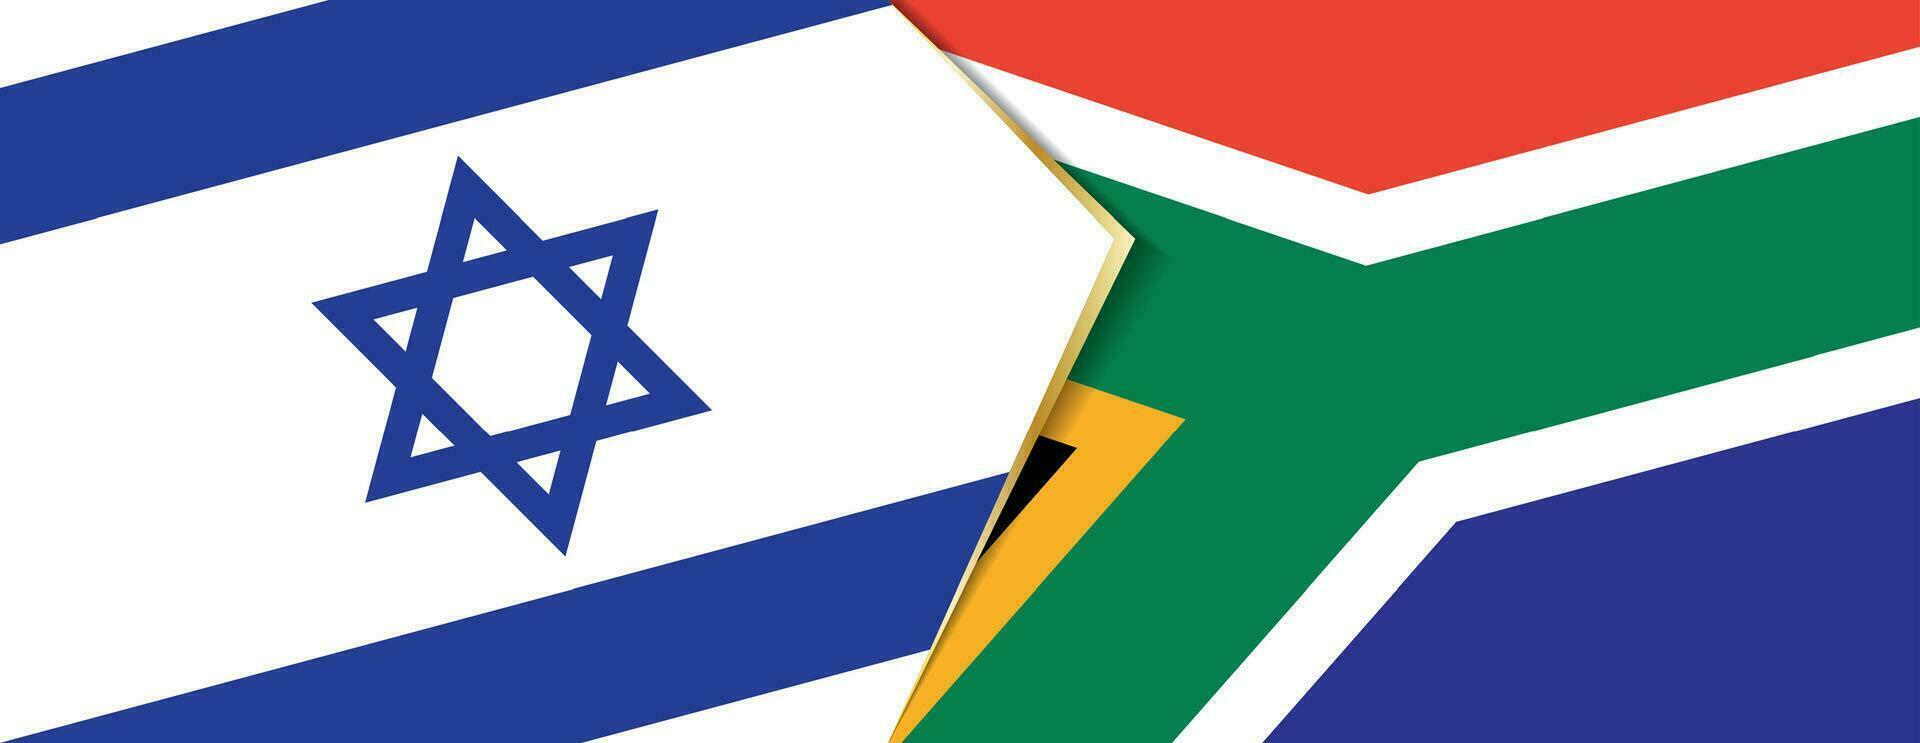 Israel and South Africa flags, two vector flags.